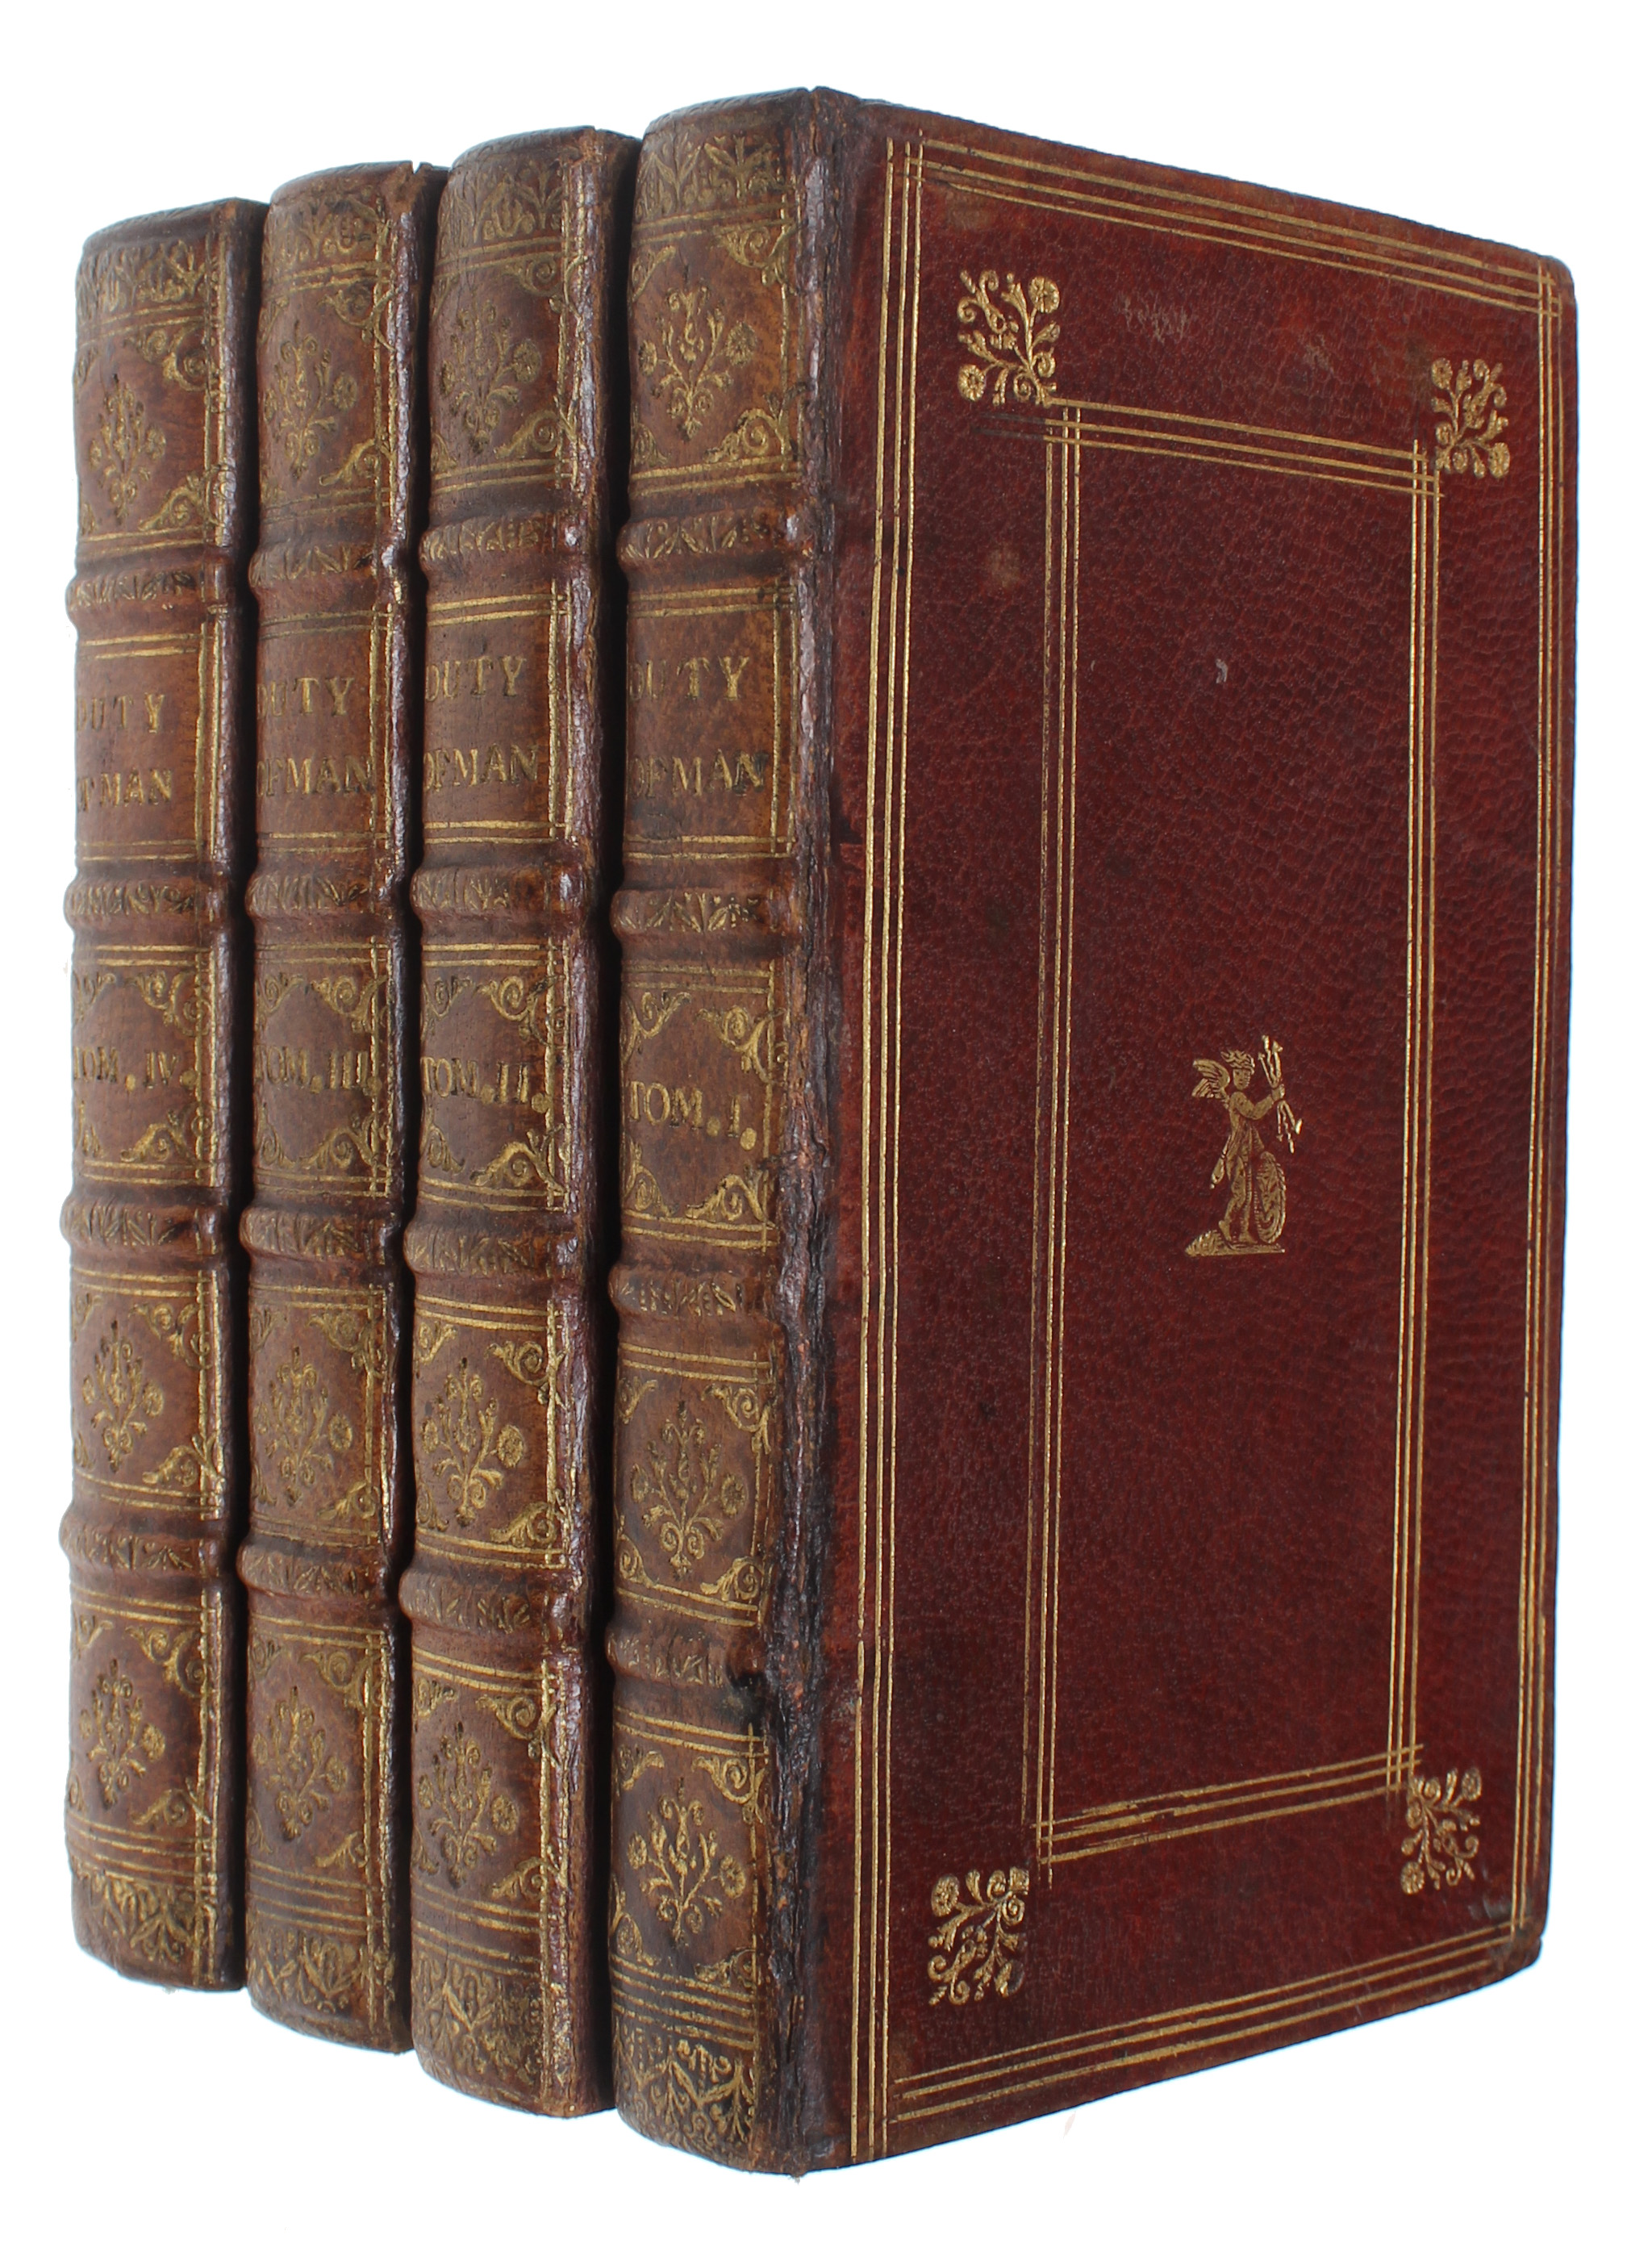 ALLESTREE, RICHARD). The Works of the Author of the Whole Duty of Man. In seven Books. In two Volumes. + (The Same:) Written by the Author of the Whole